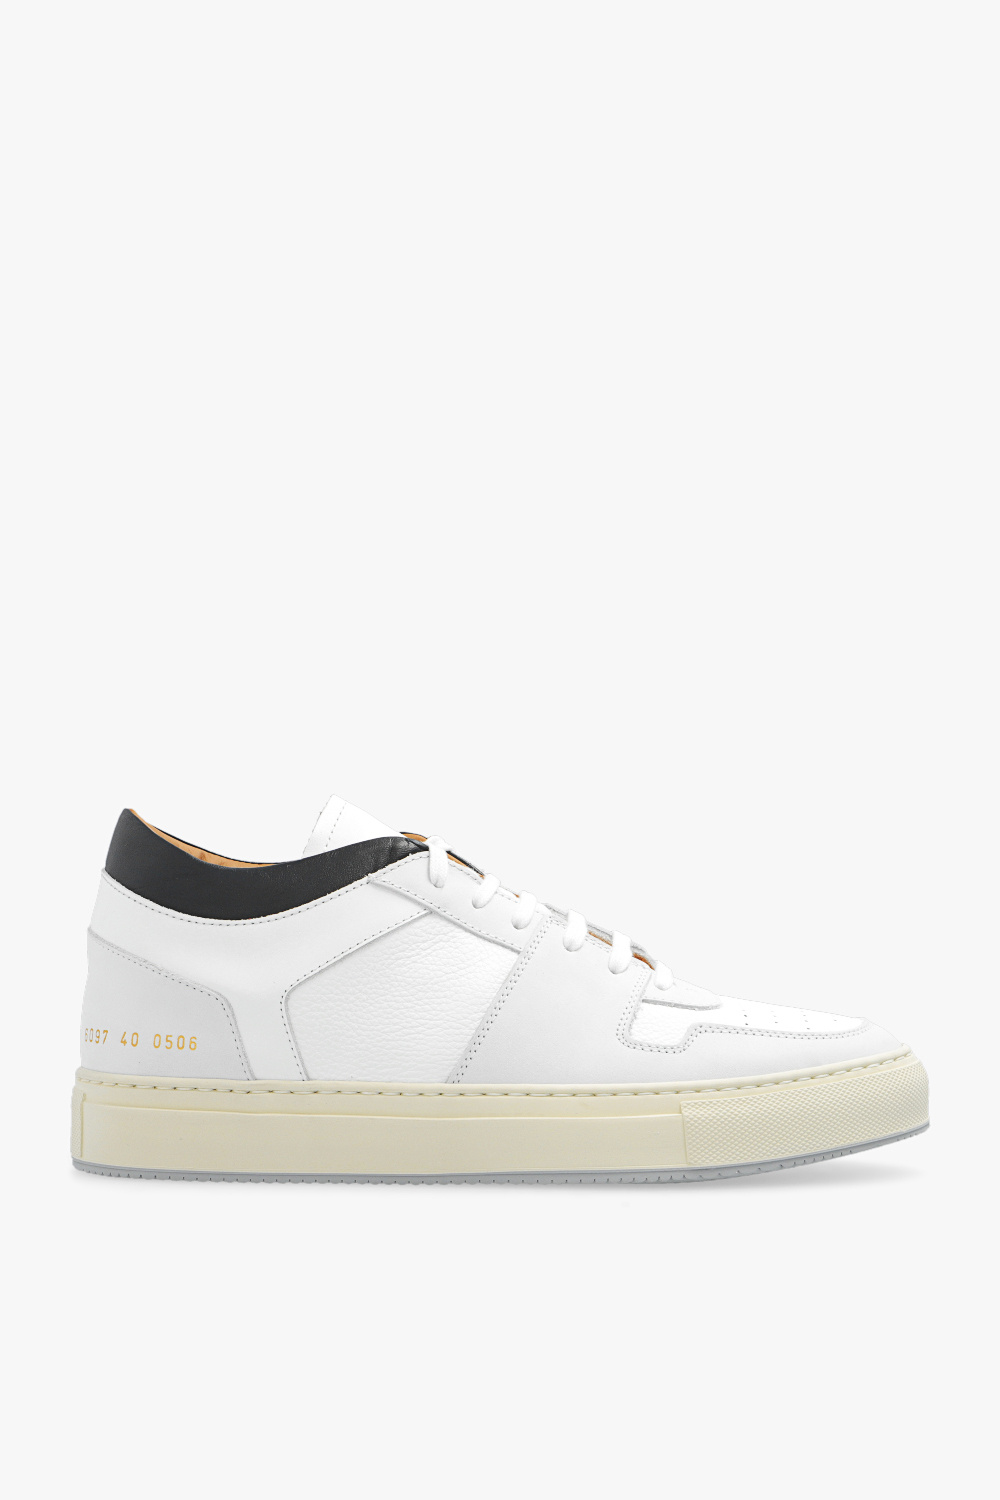 Common Projects ‘Decades Mid’ sneakers | Women's Shoes | Vitkac